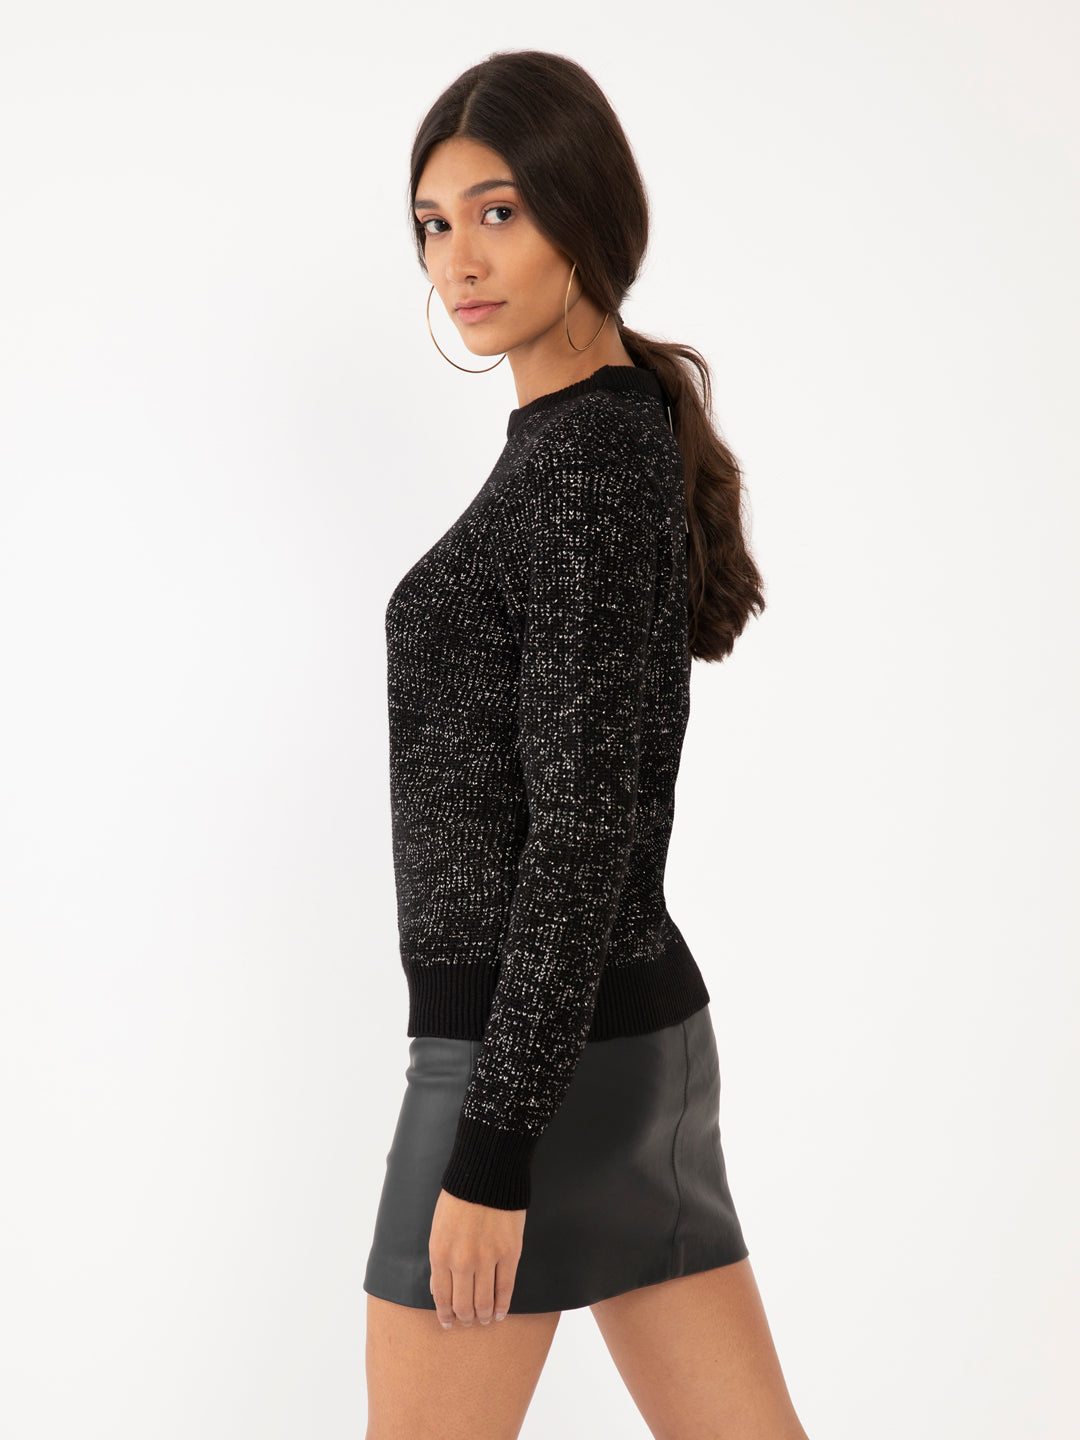 Black Textured Sweater For Women